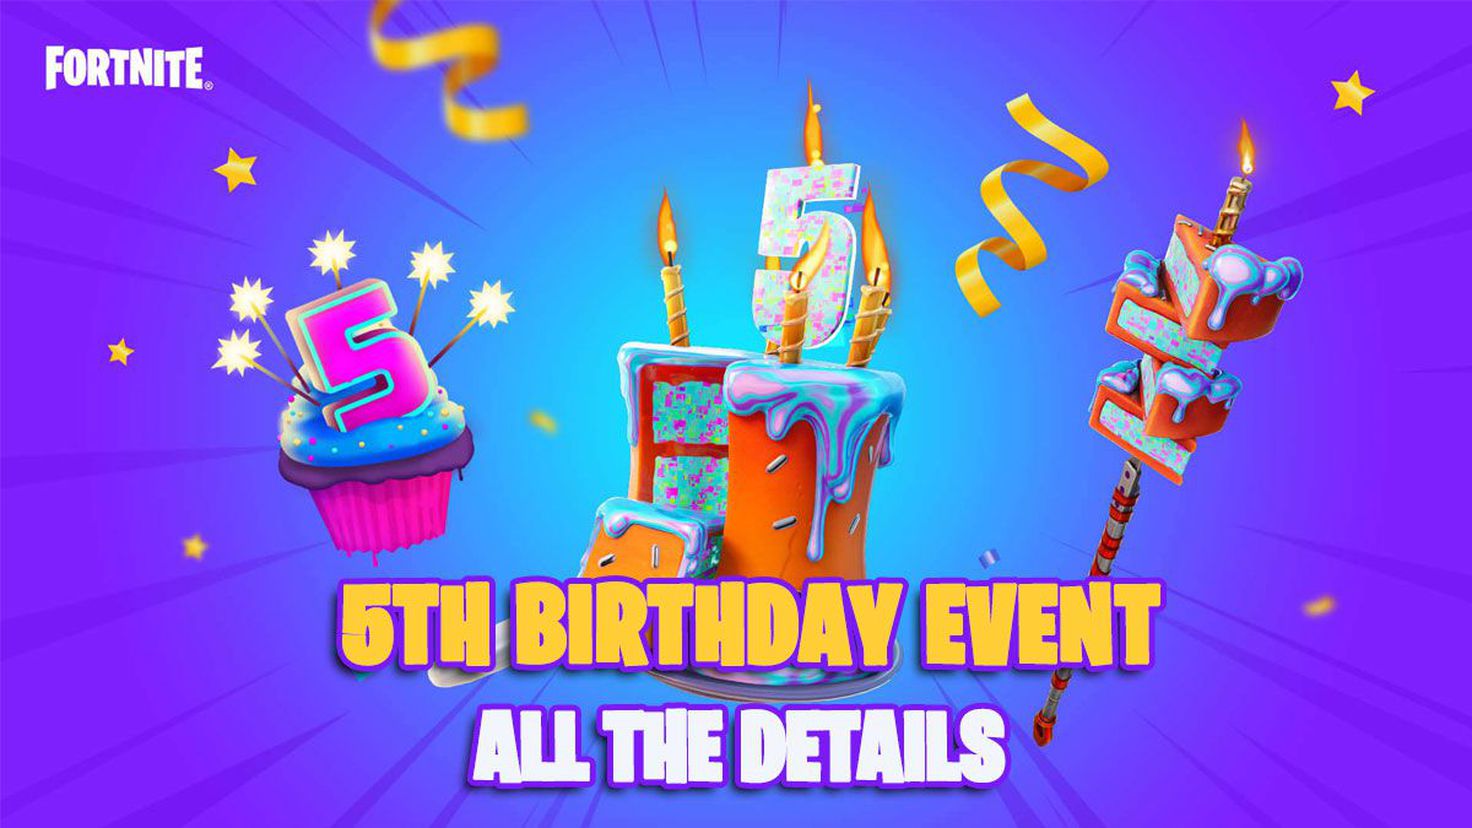 Fortnite' one-year birthday: How the $1 billion game is celebrating